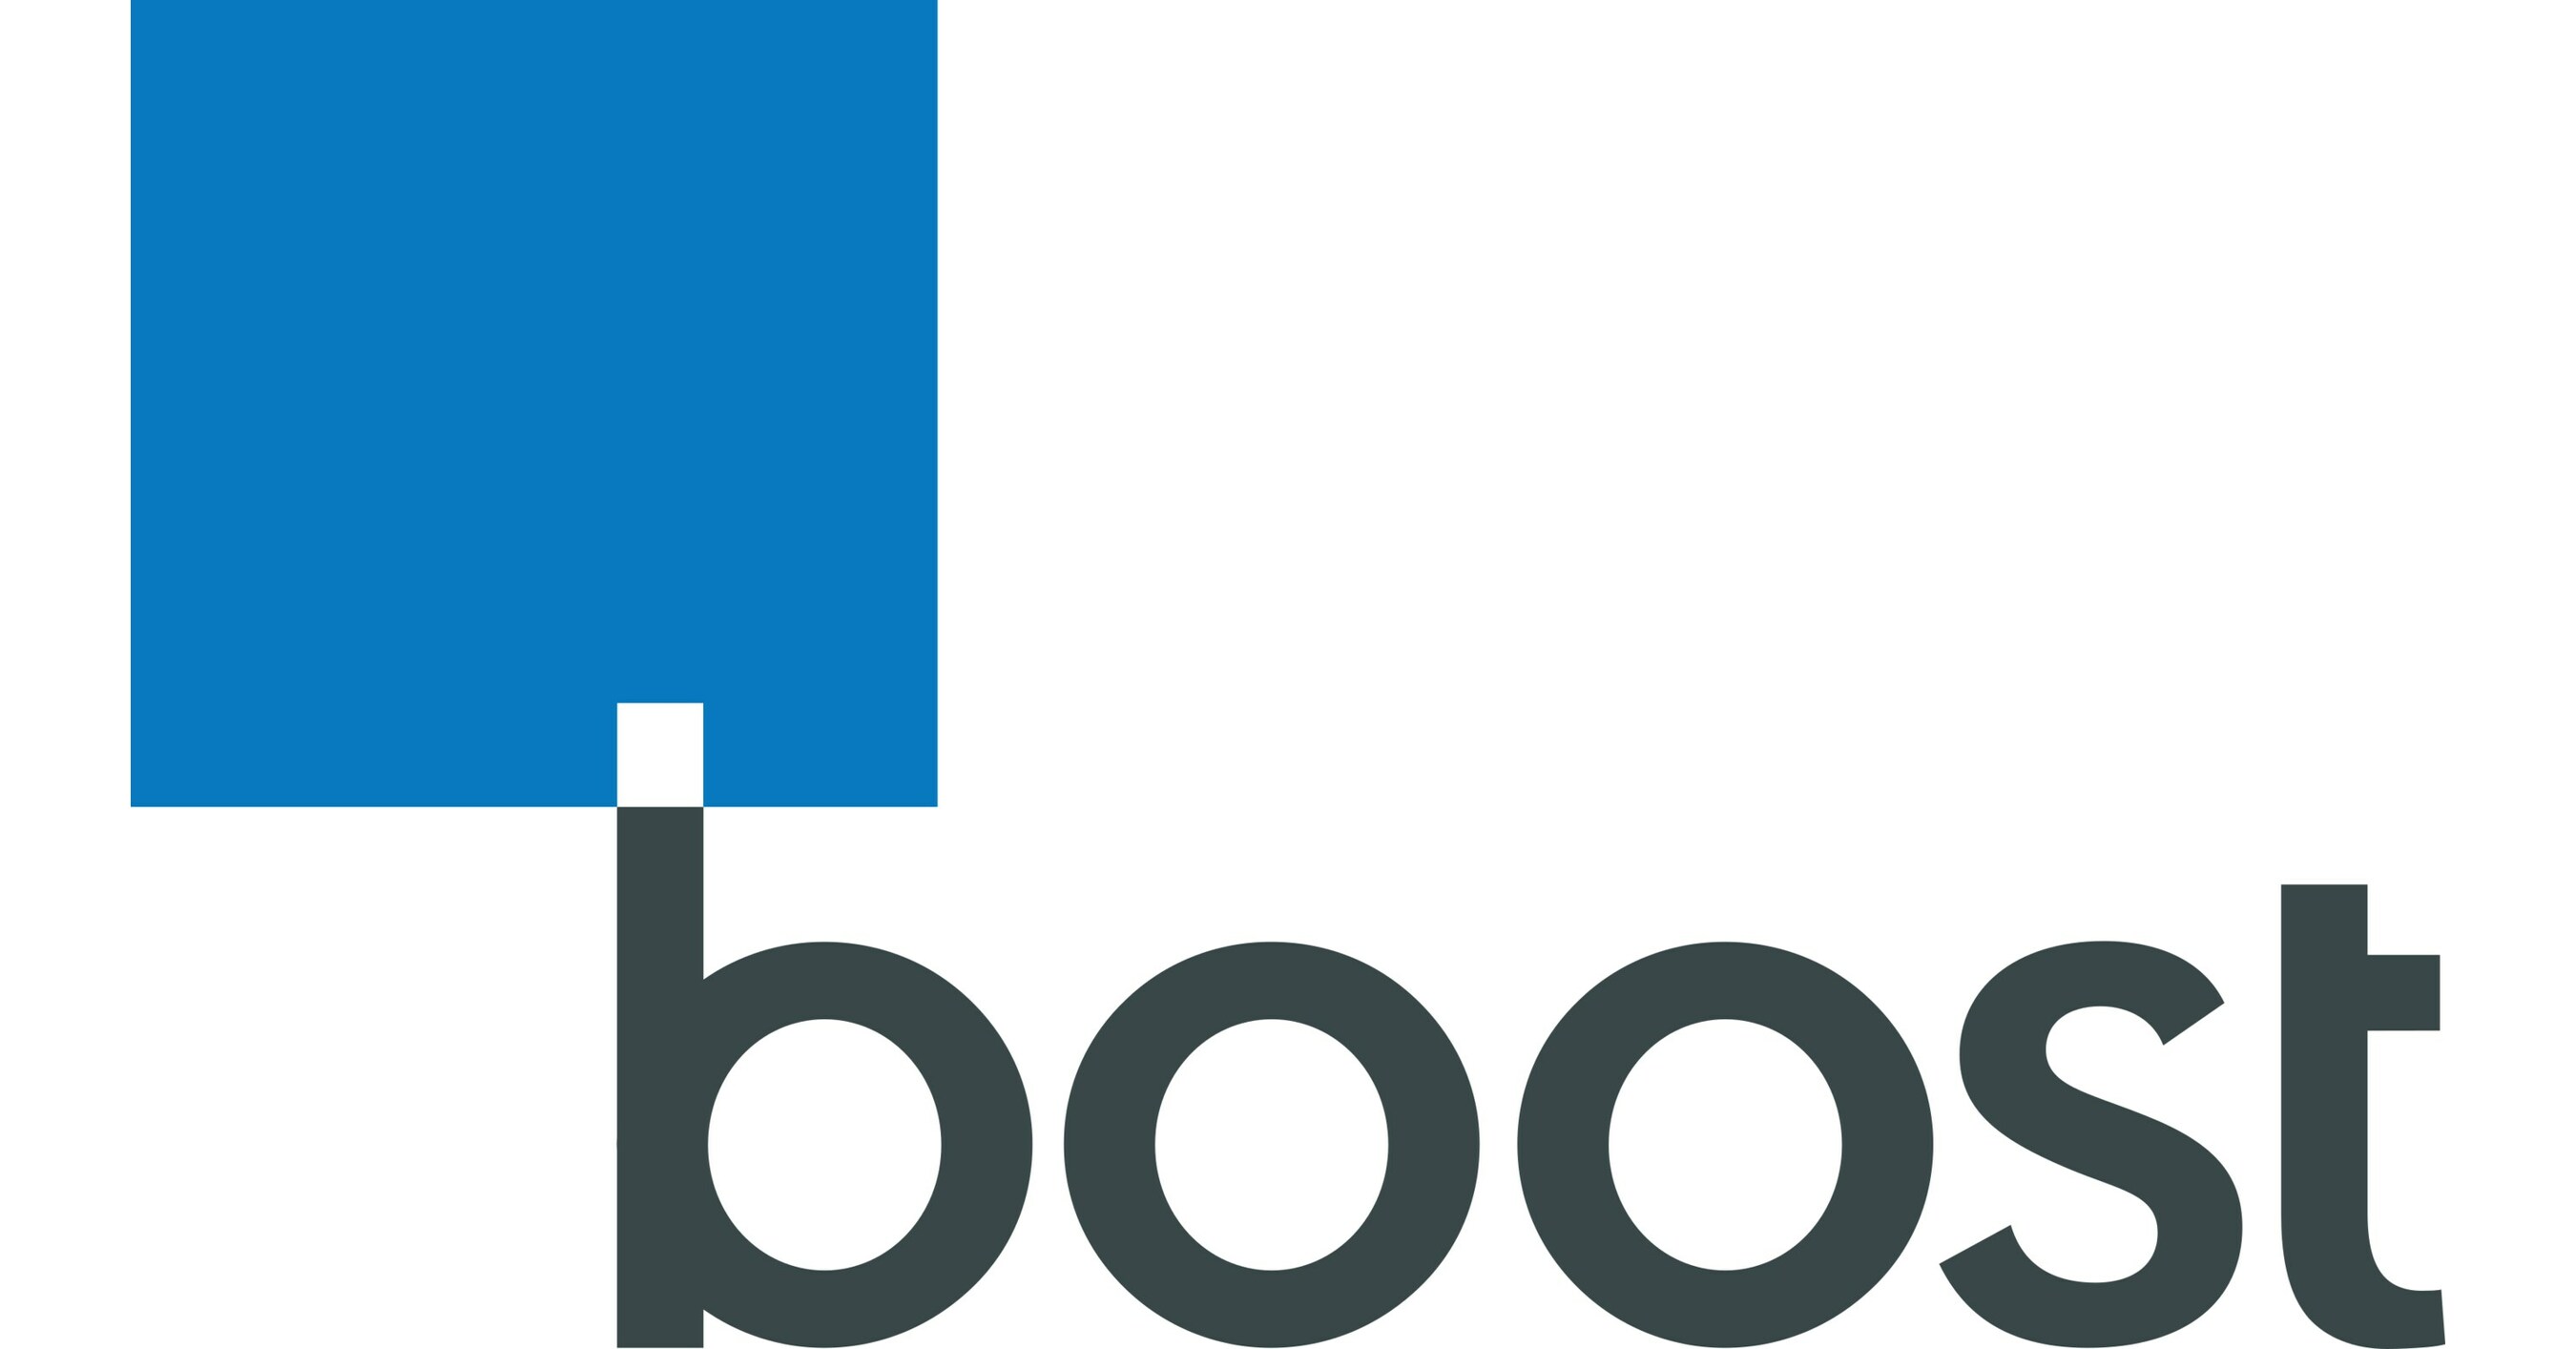 Introducing Boost+